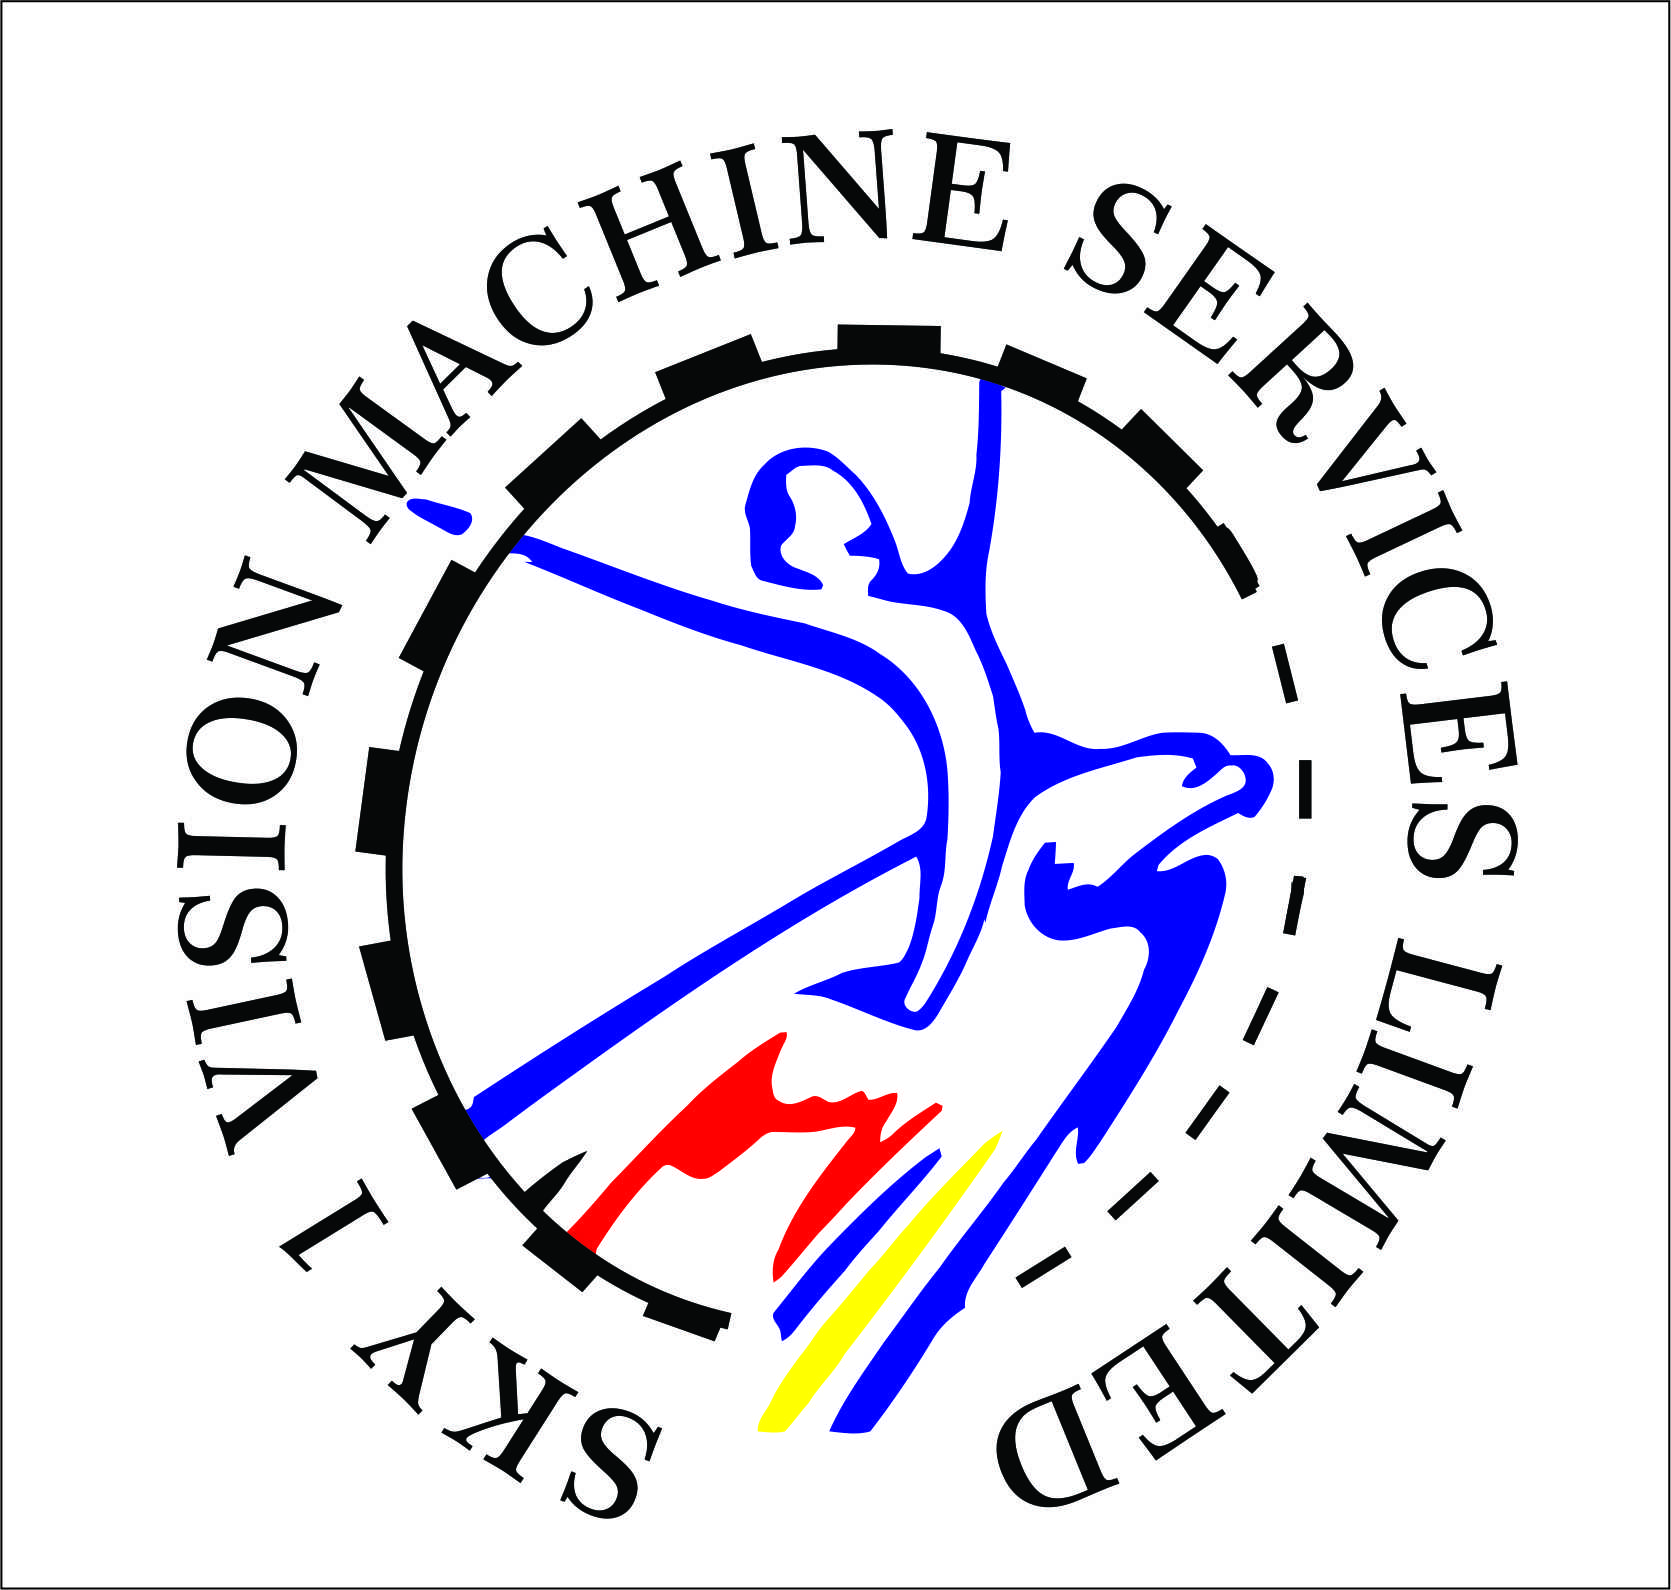 Sky 1 Vision Machine Services Limited